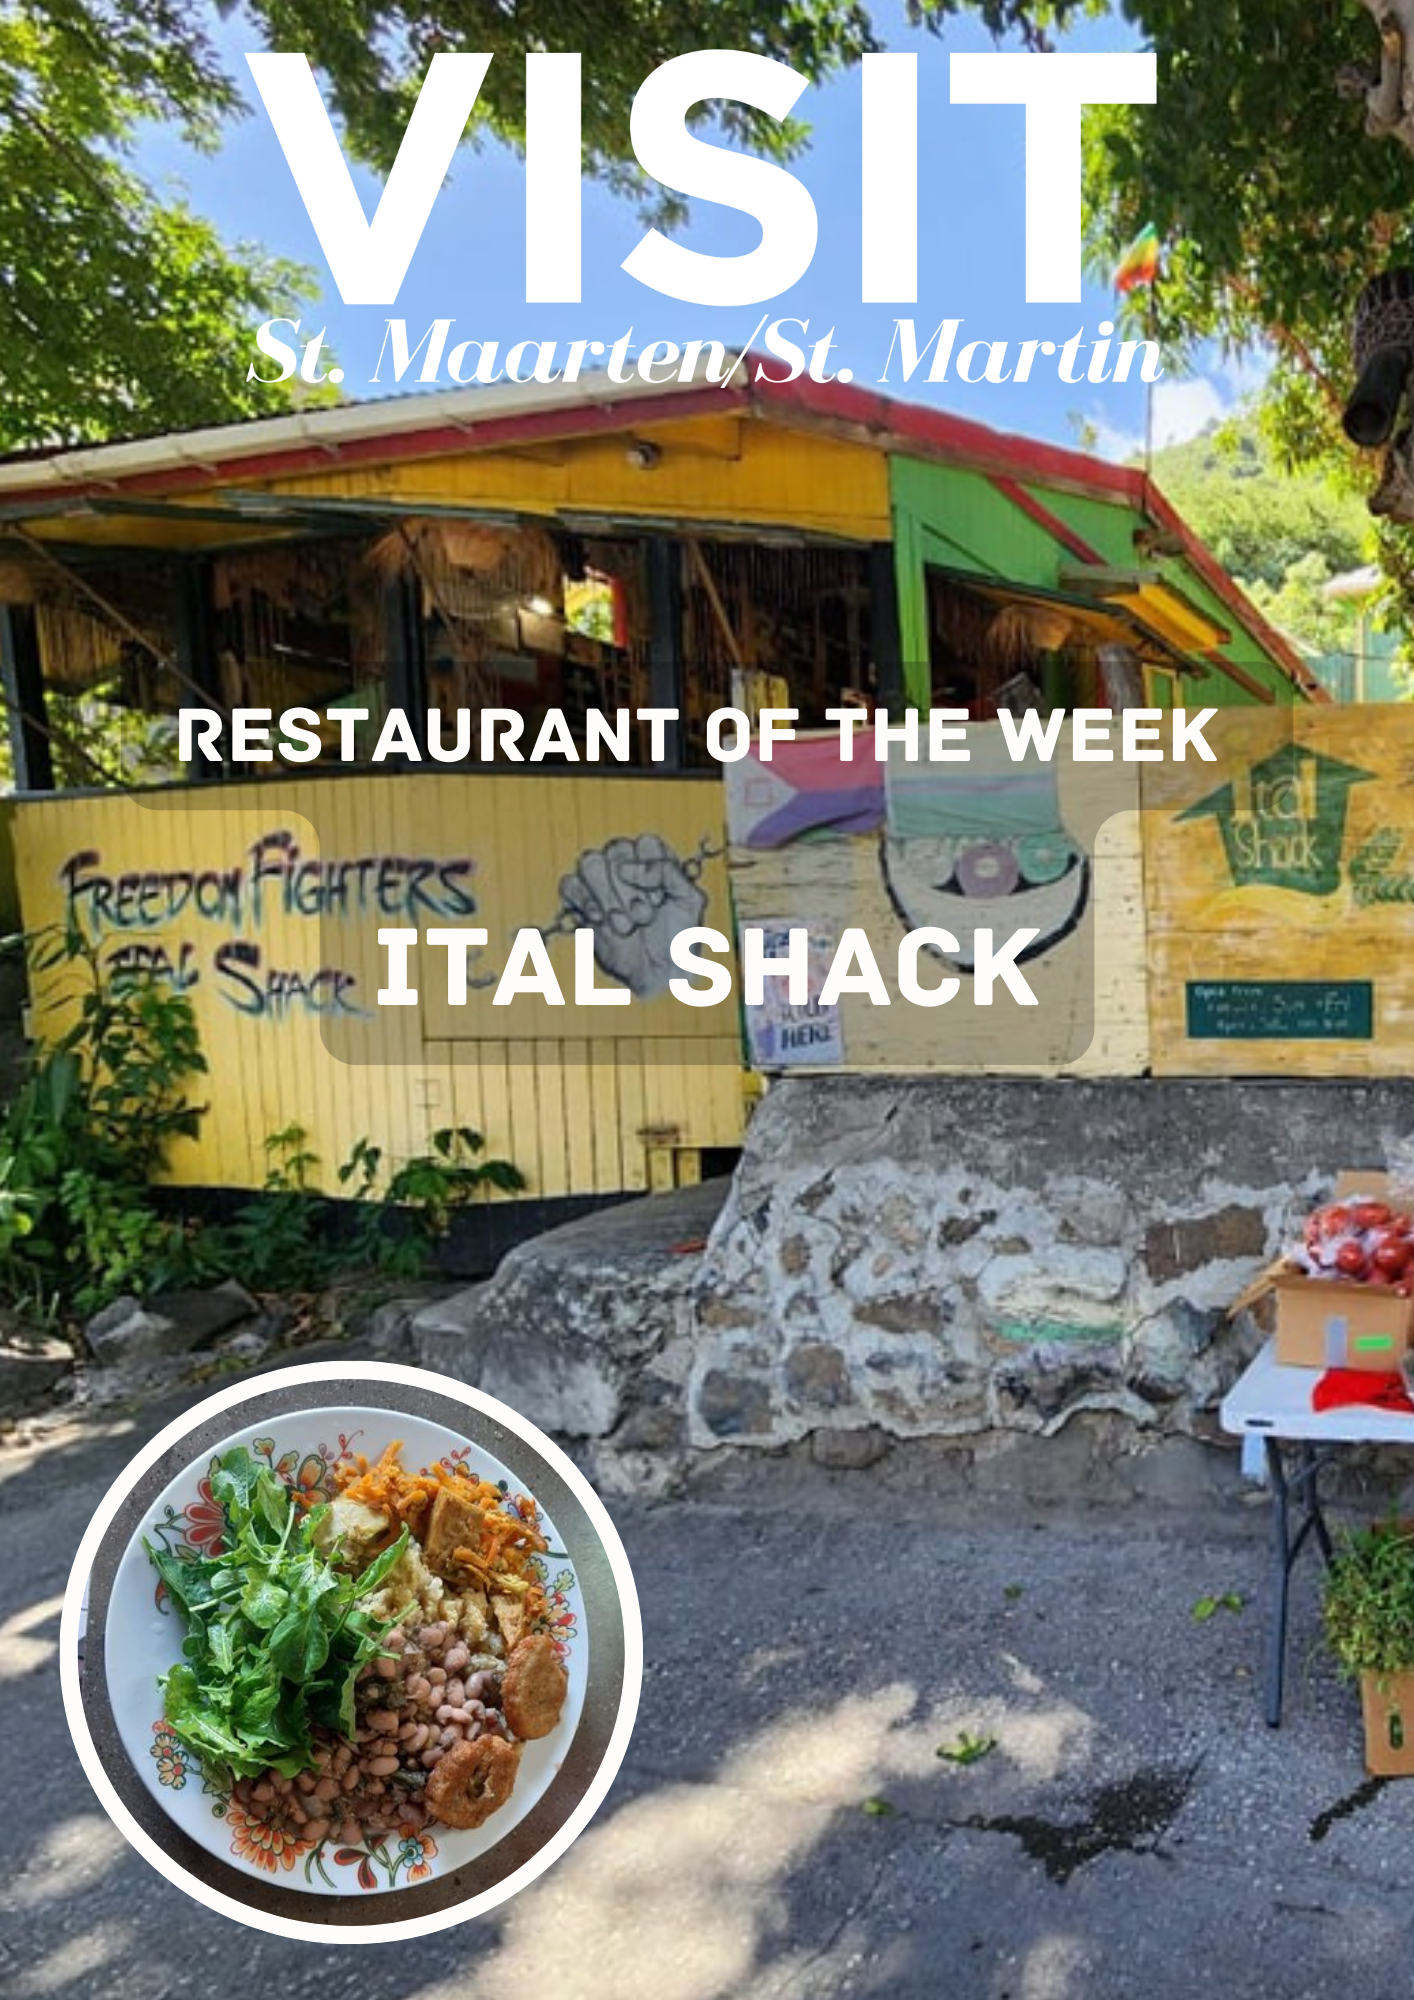 Restaurant of the week is the Freedom Fighters Ital Shack St Maarten